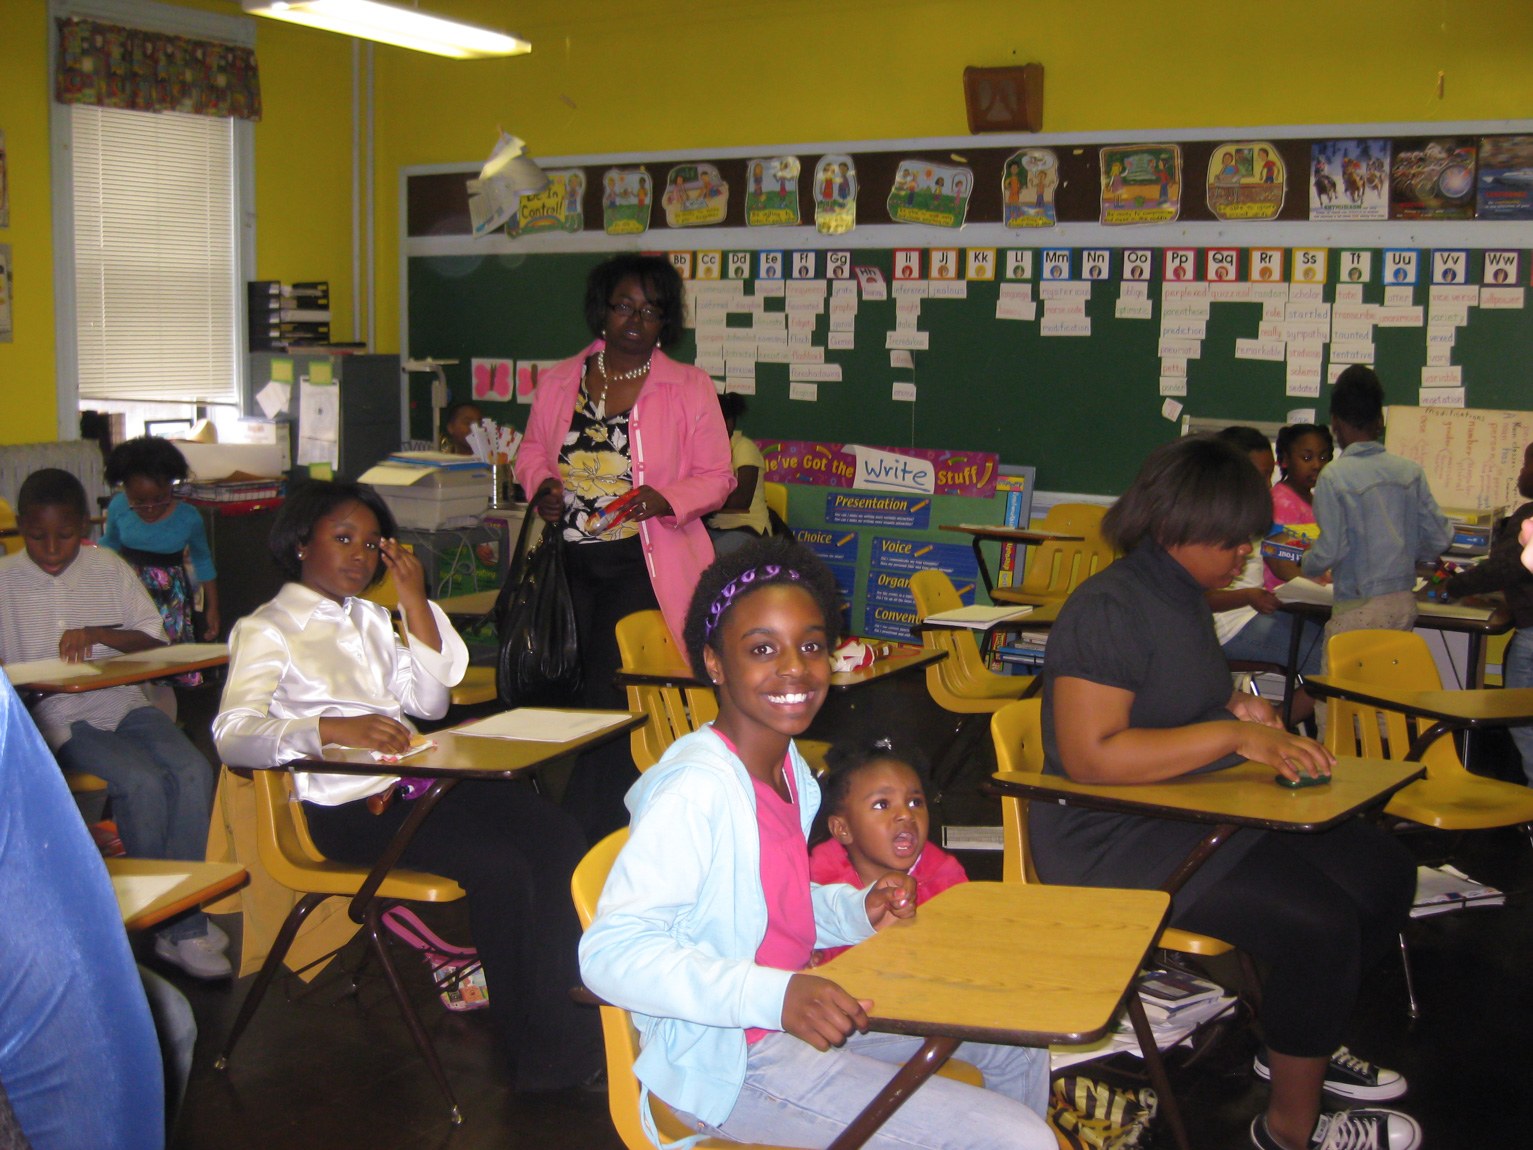 A classroom of students sitting at desks.